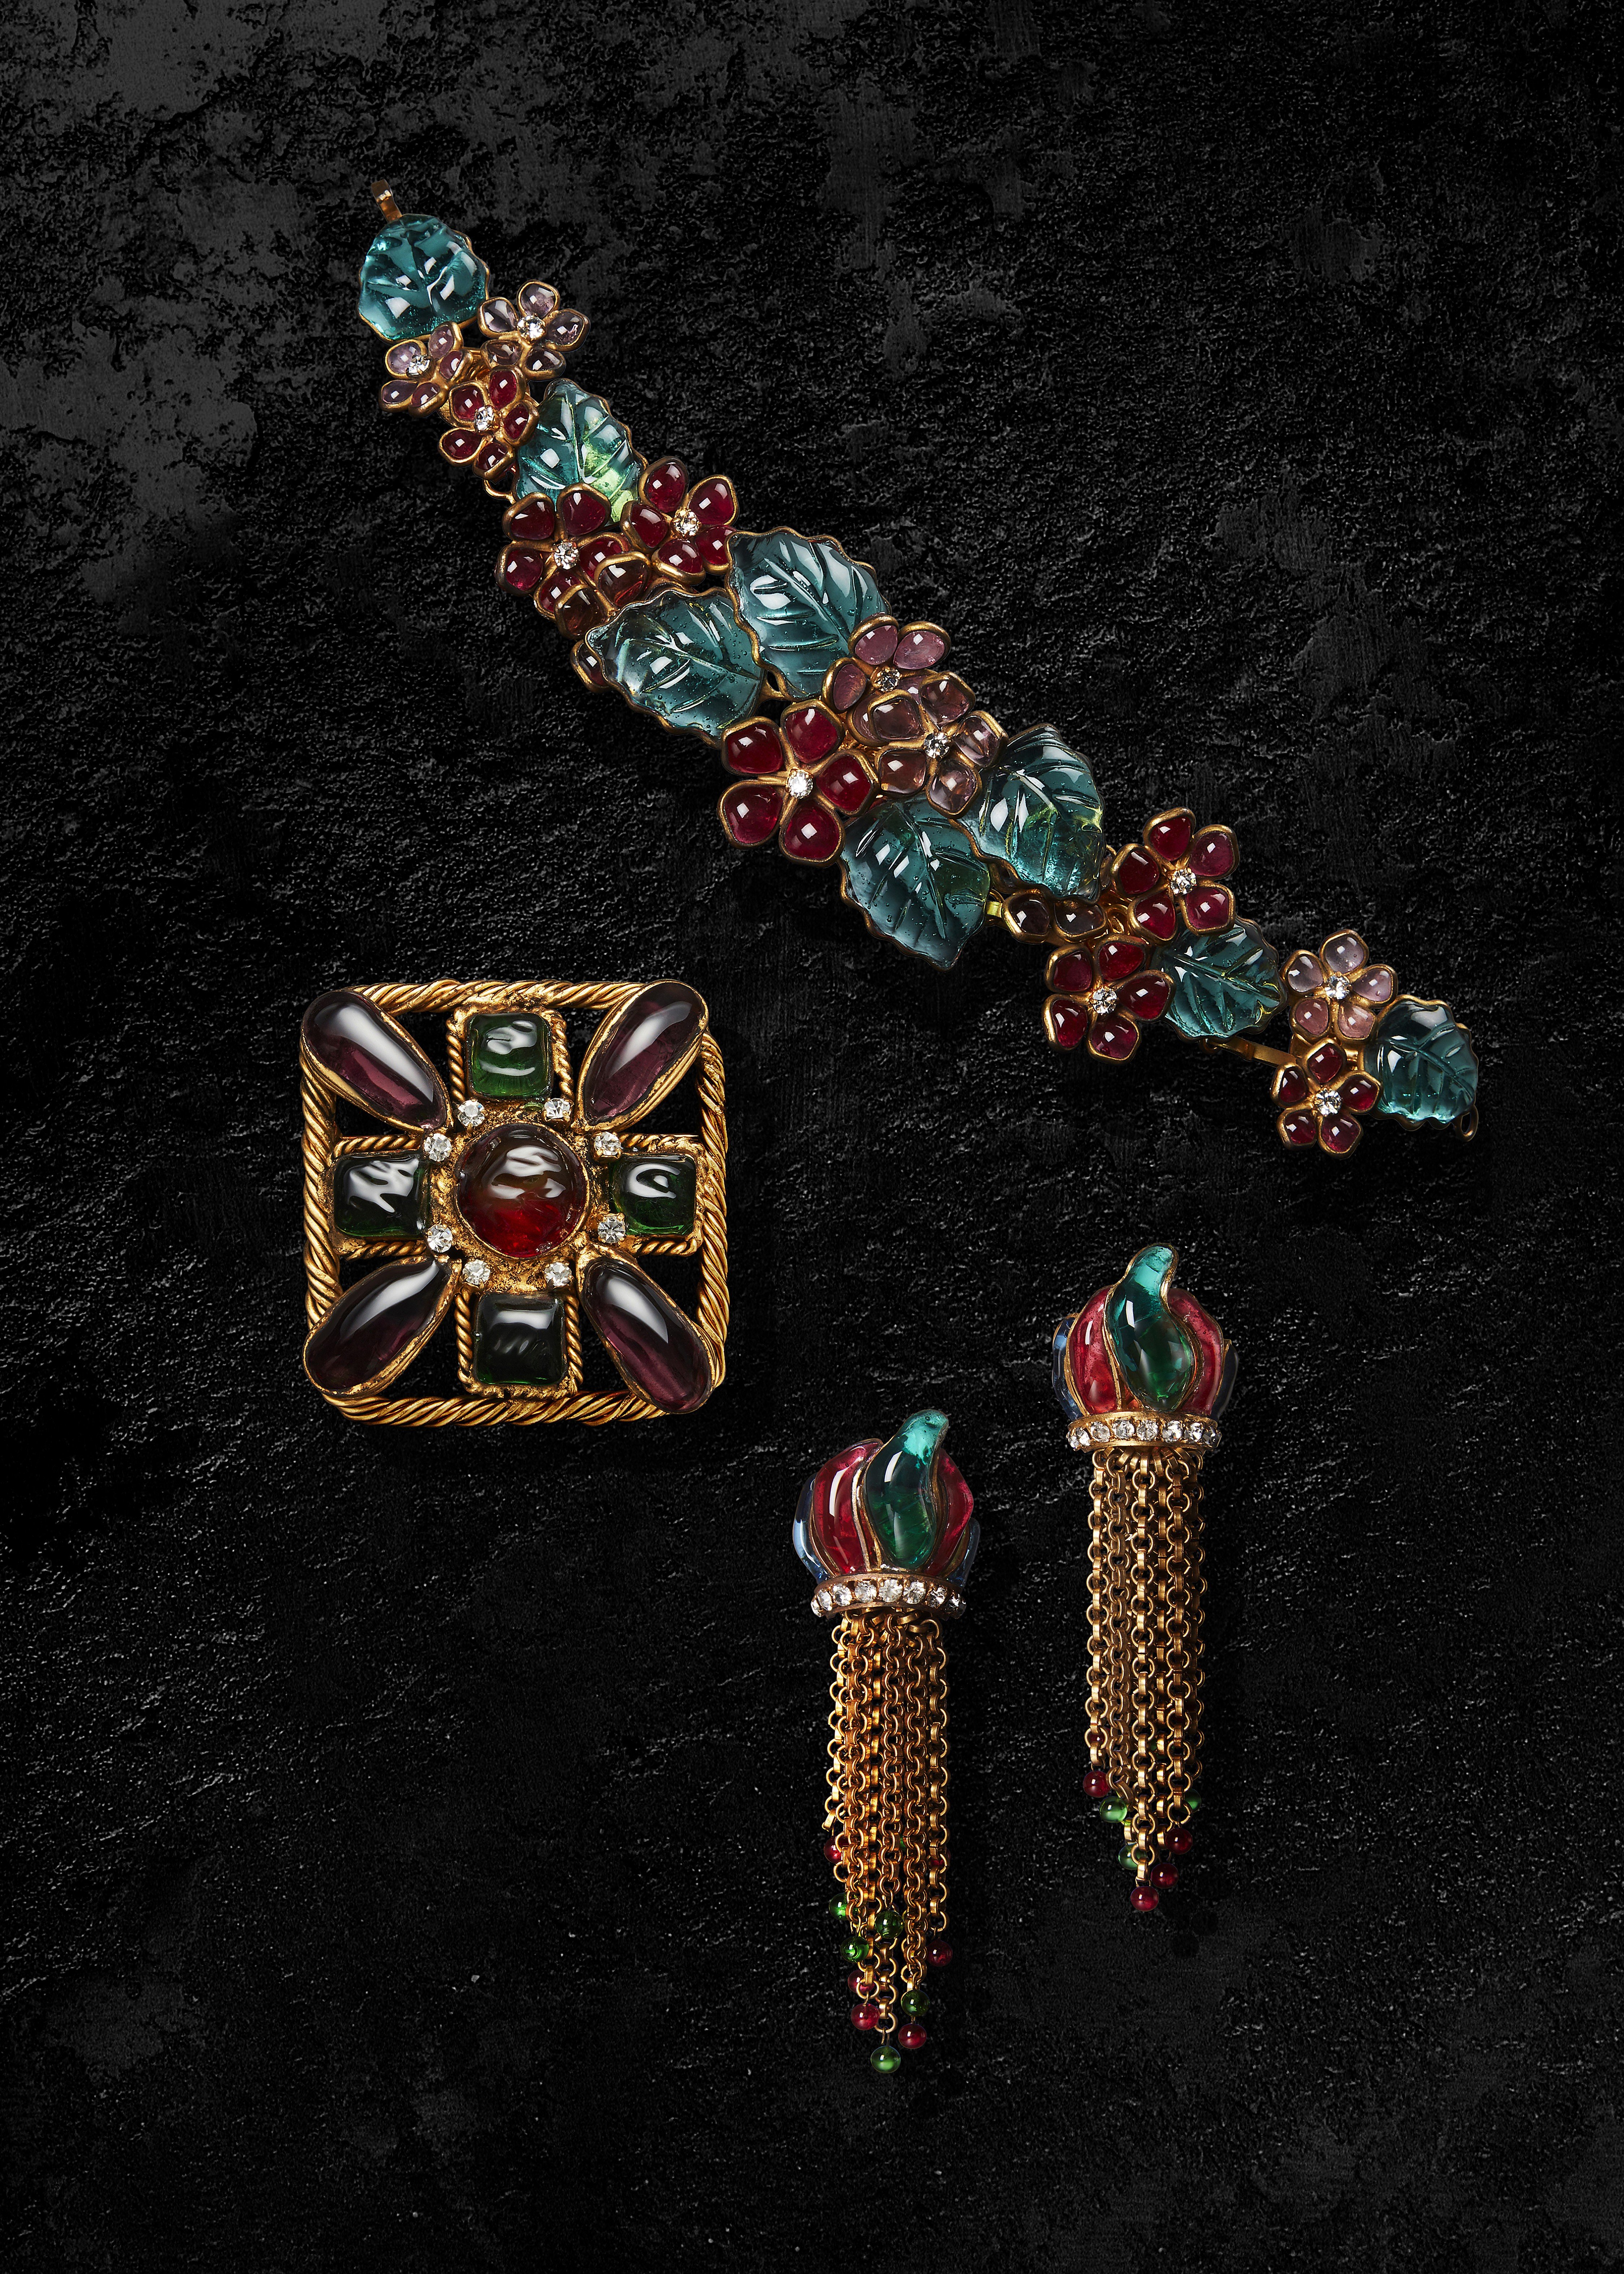 Vintage Chanel Jewellery - a celebration of Coco Chanel – Jagged Metal